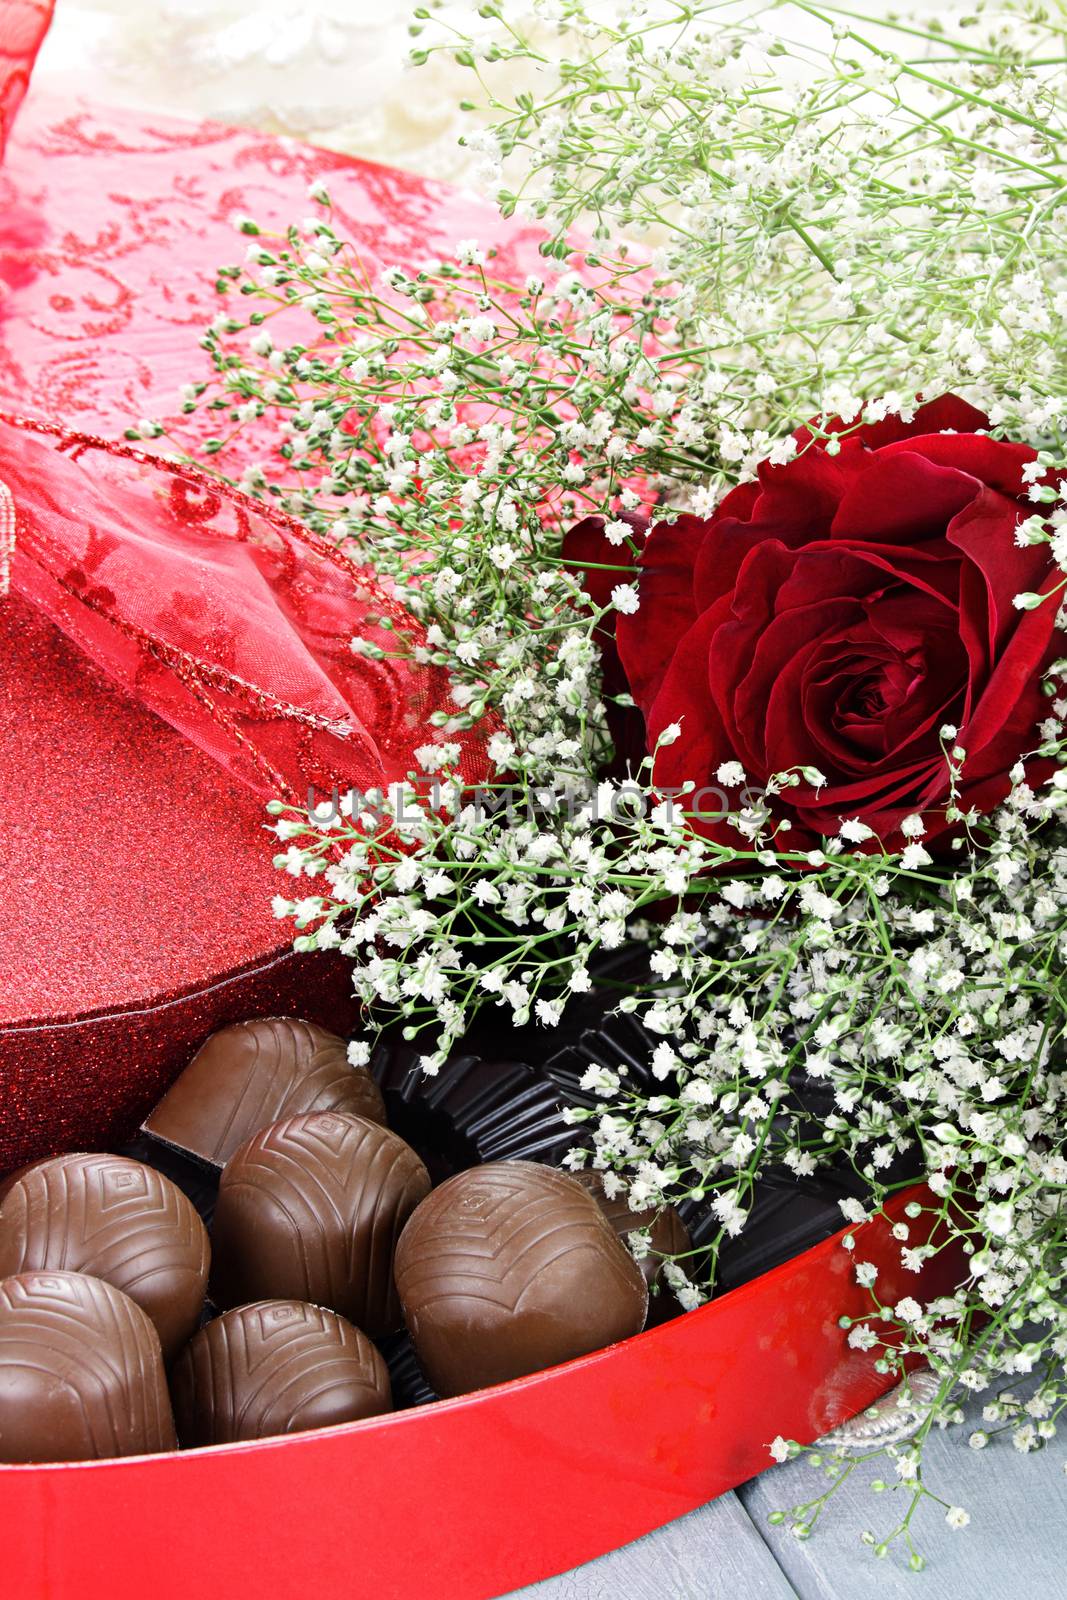 Heart shaped box of Valentines Day chocolates with beautiful long stem red roses.